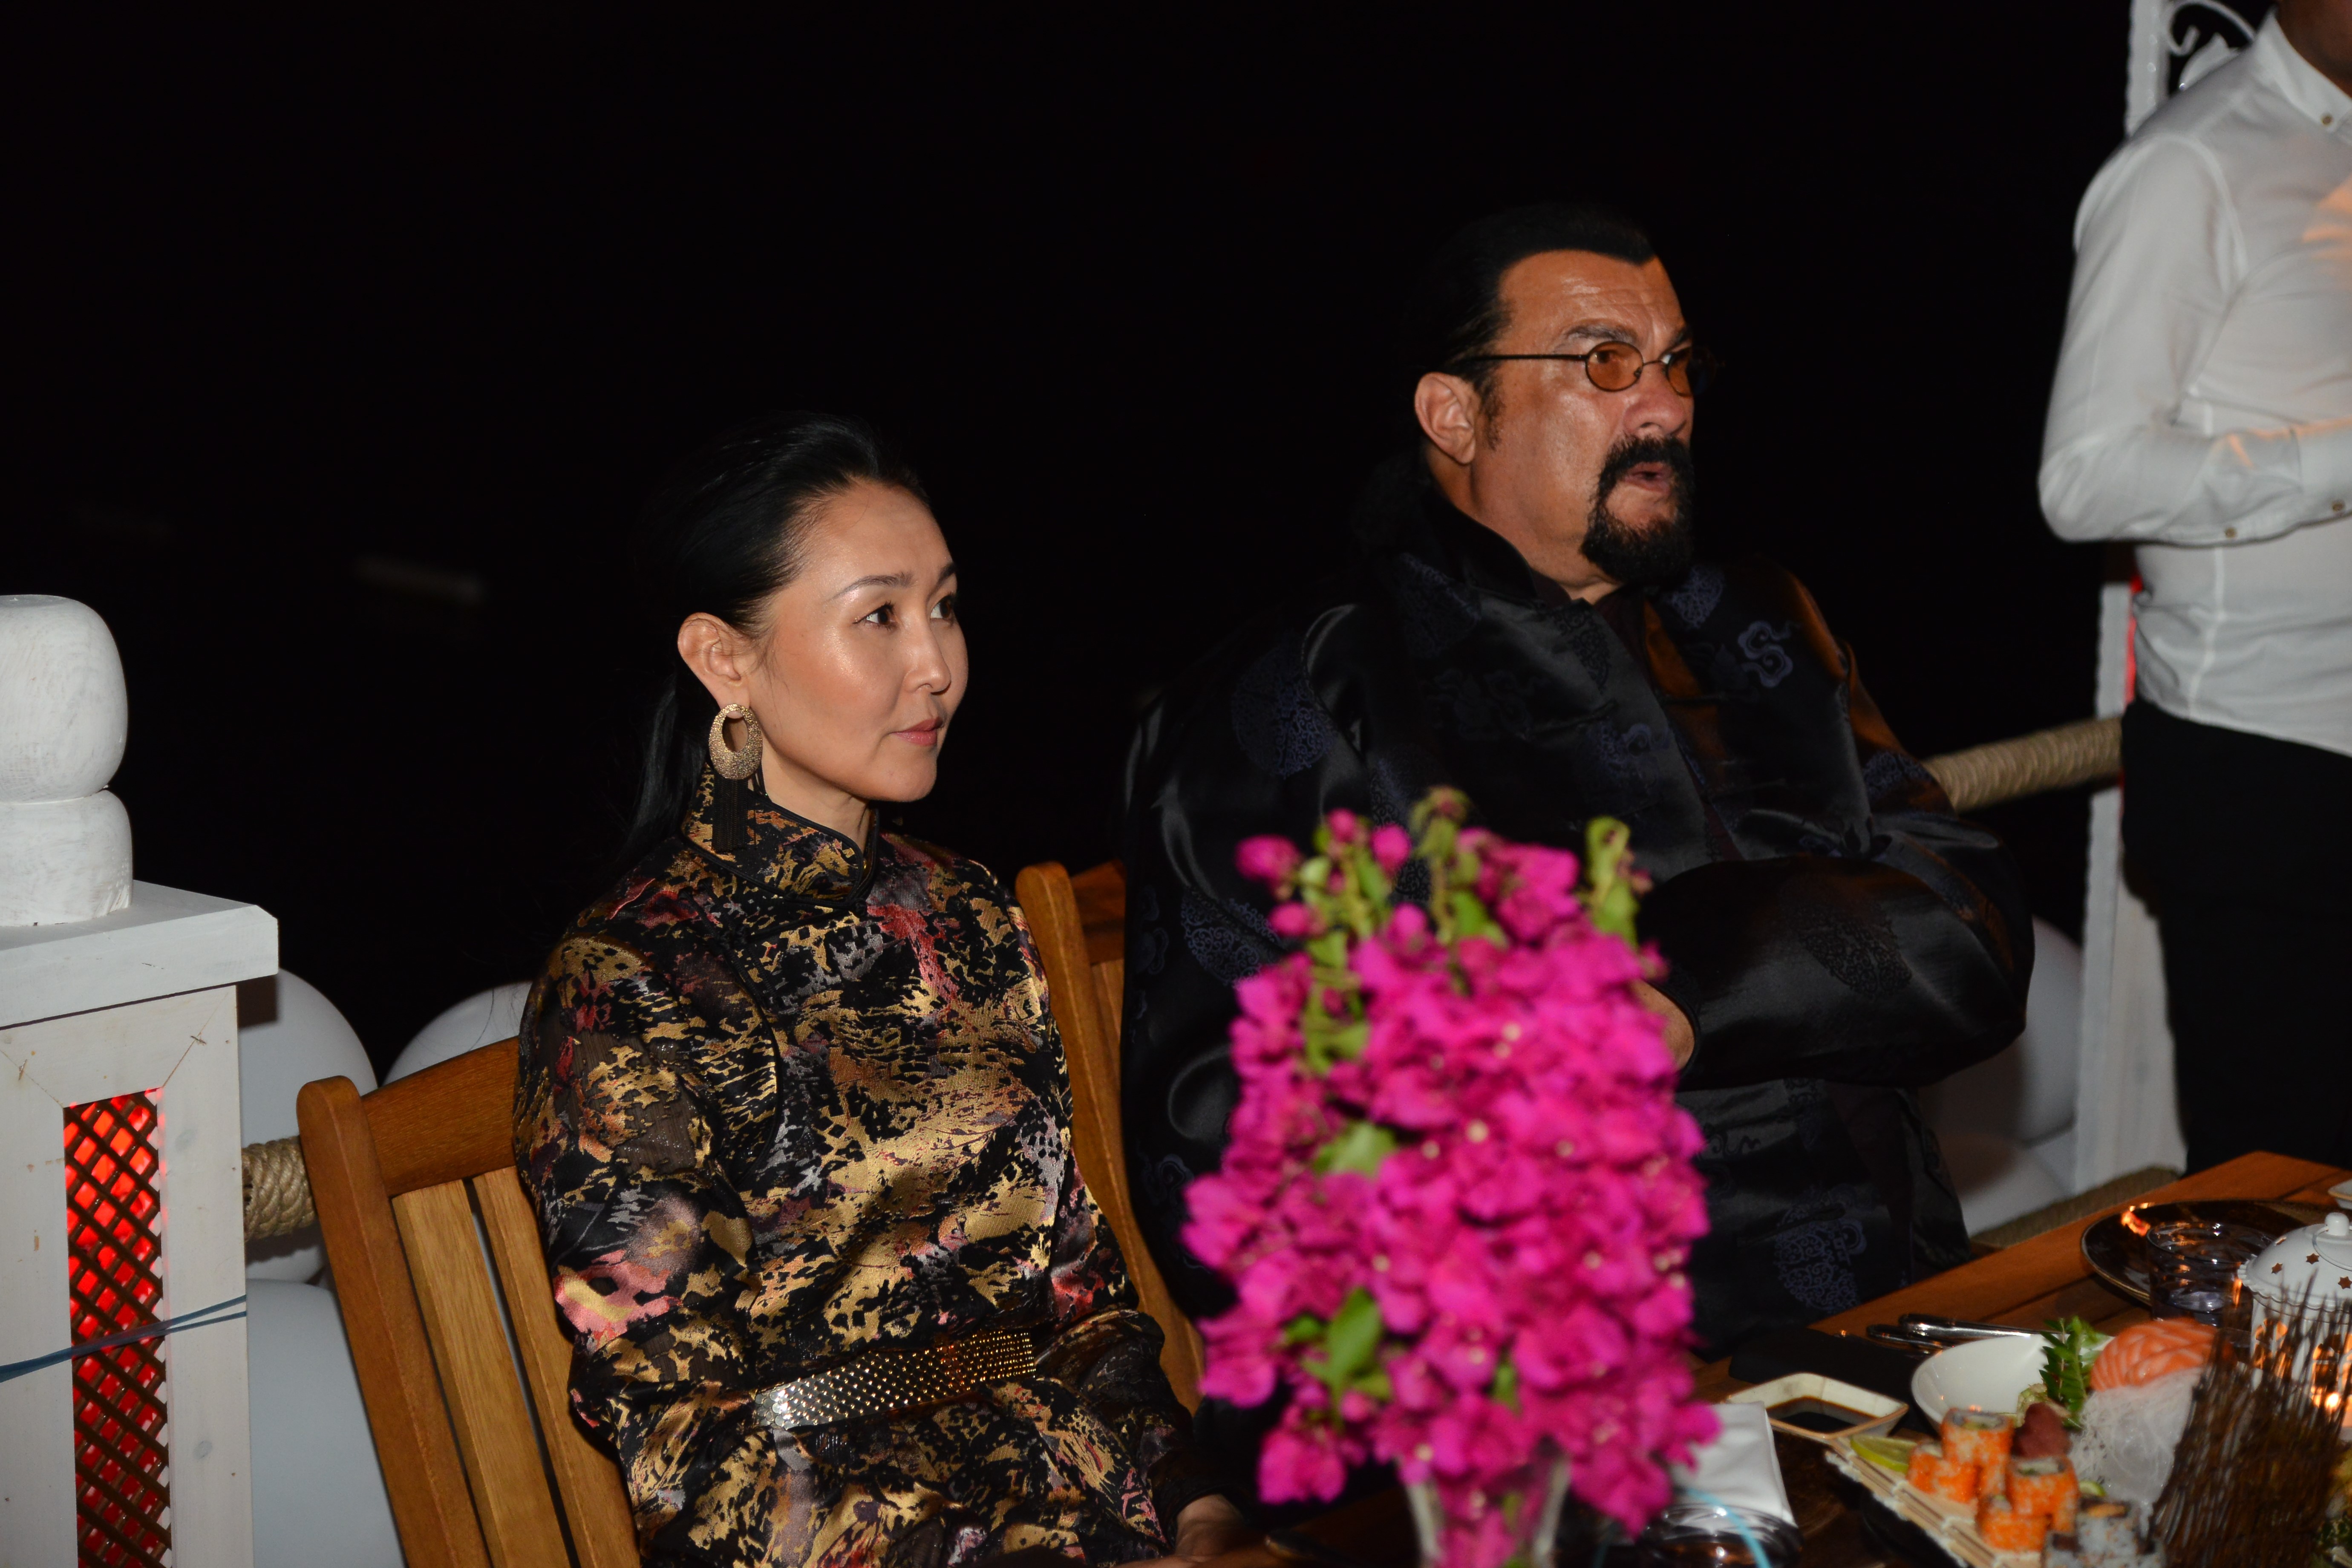 Steven Seagal and Erdenetuya Seagal attend a dinner following arrival on an invitation from Turkish American Business Association - American Chamber of Commerce in Turkey (TABA-AmCHam) on June 30, 2019, in the Bodrum district of Mugla, Turkey. | Source: Getty Images